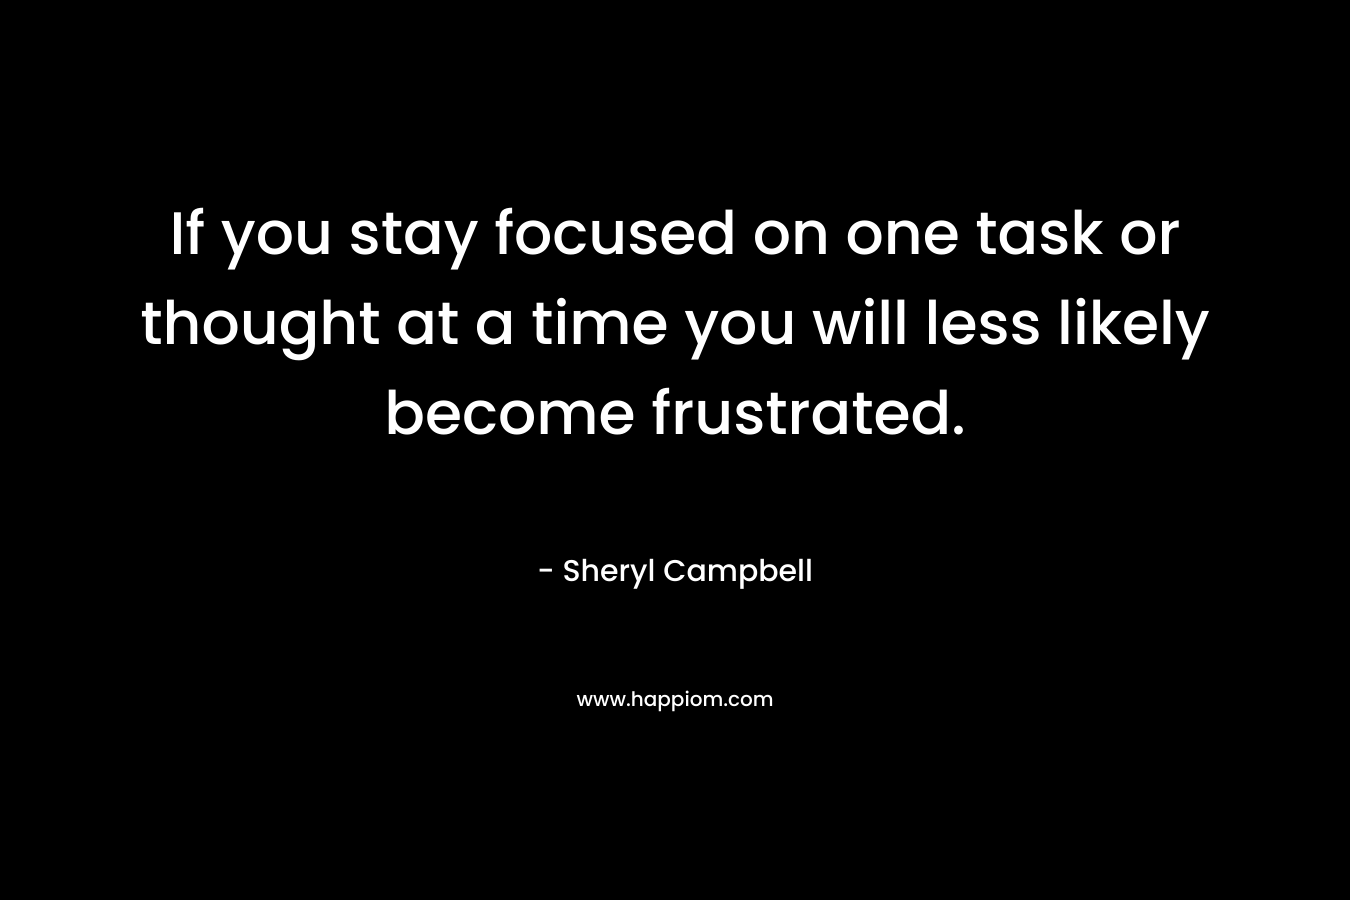 If you stay focused on one task or thought at a time you will less likely become frustrated. – Sheryl Campbell